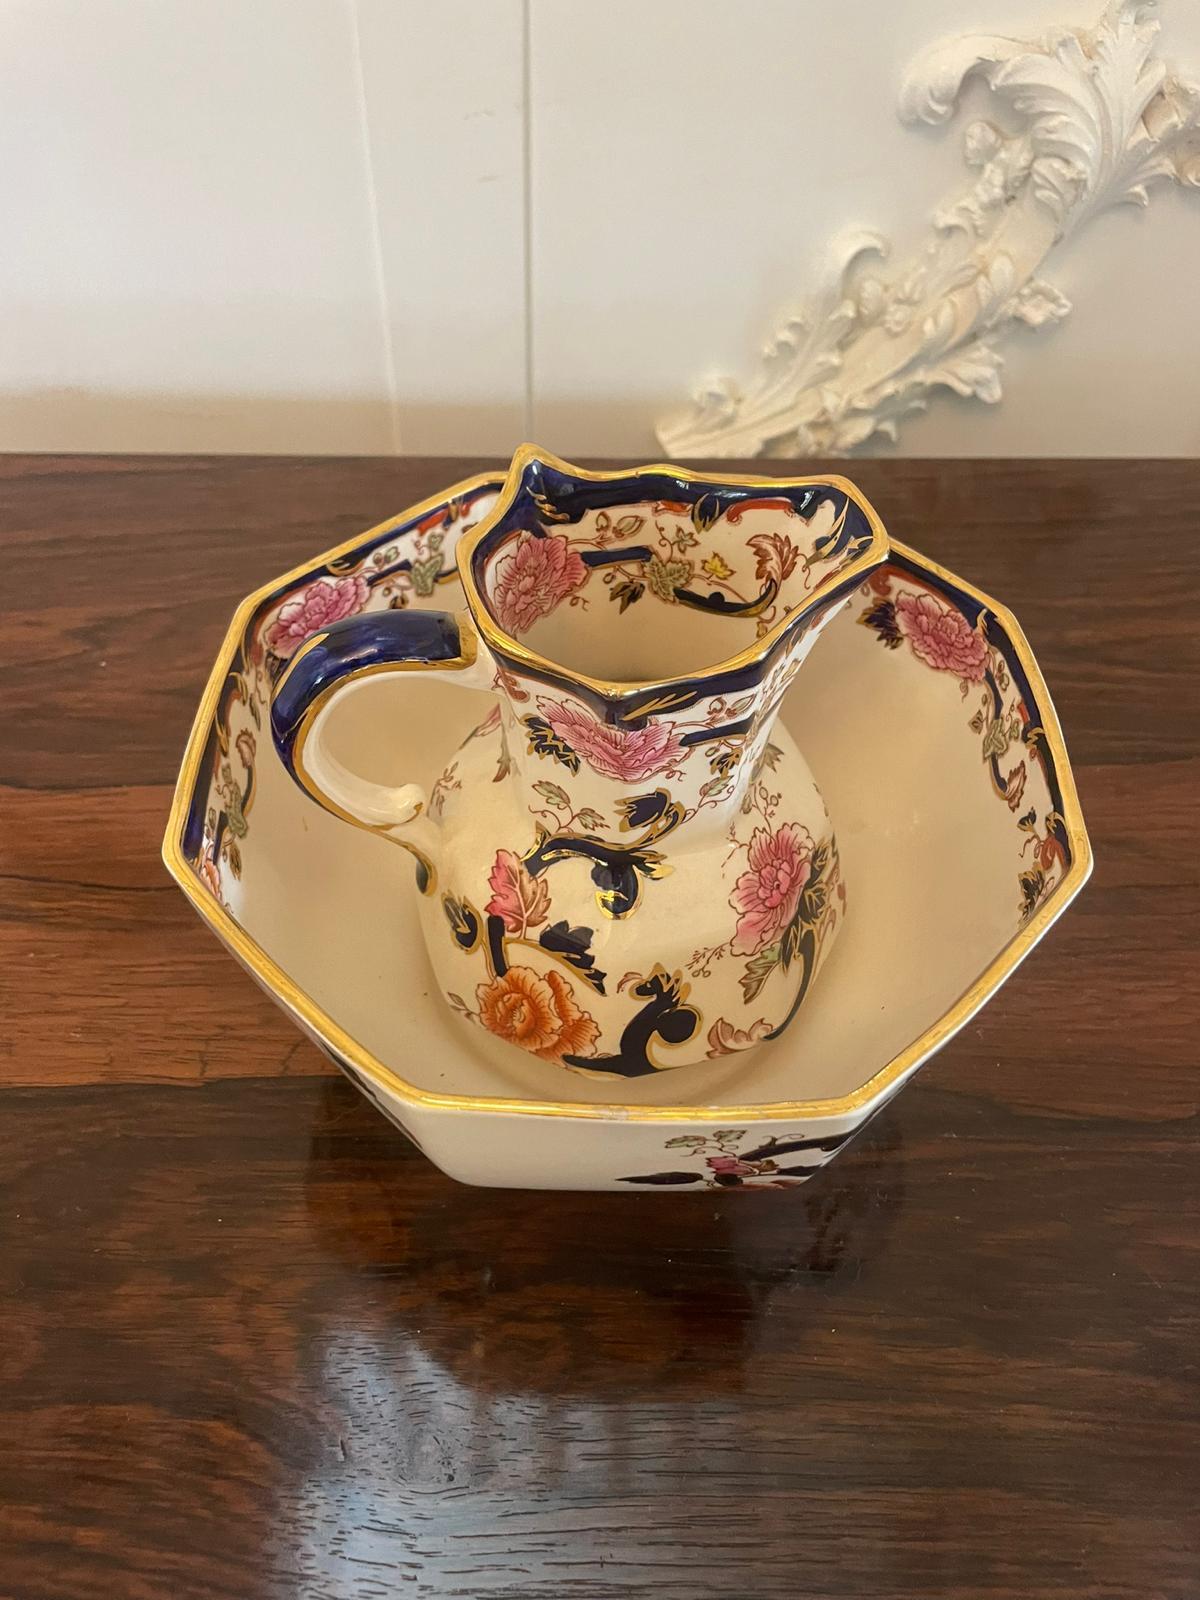 Quality antique hand painted Masons Ironstone small jug and bowl with fantastic quality hand painted decoration in red, pink, yellow, blue, green and gold colours 

A beautifully decorated set in mint condition

Dimensions:
Jug 13.5 x 14 x 12